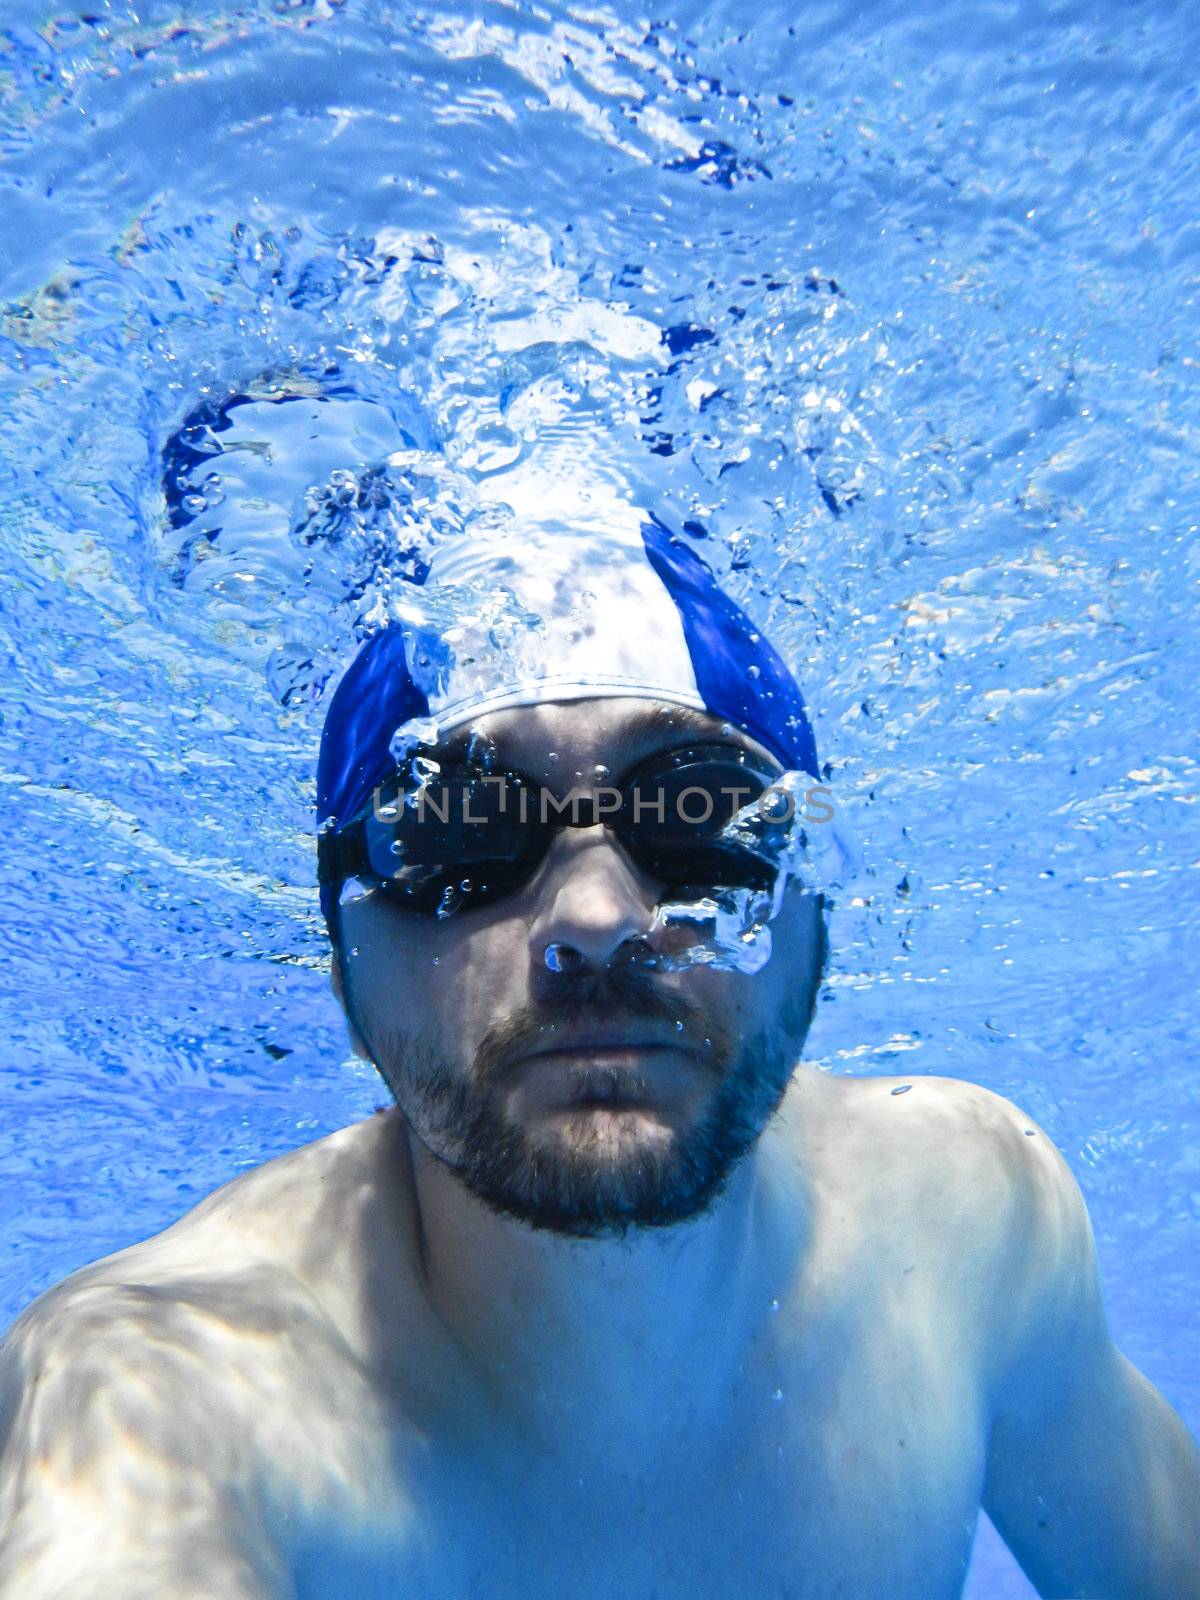 Man swimming with glasses underwater in pool